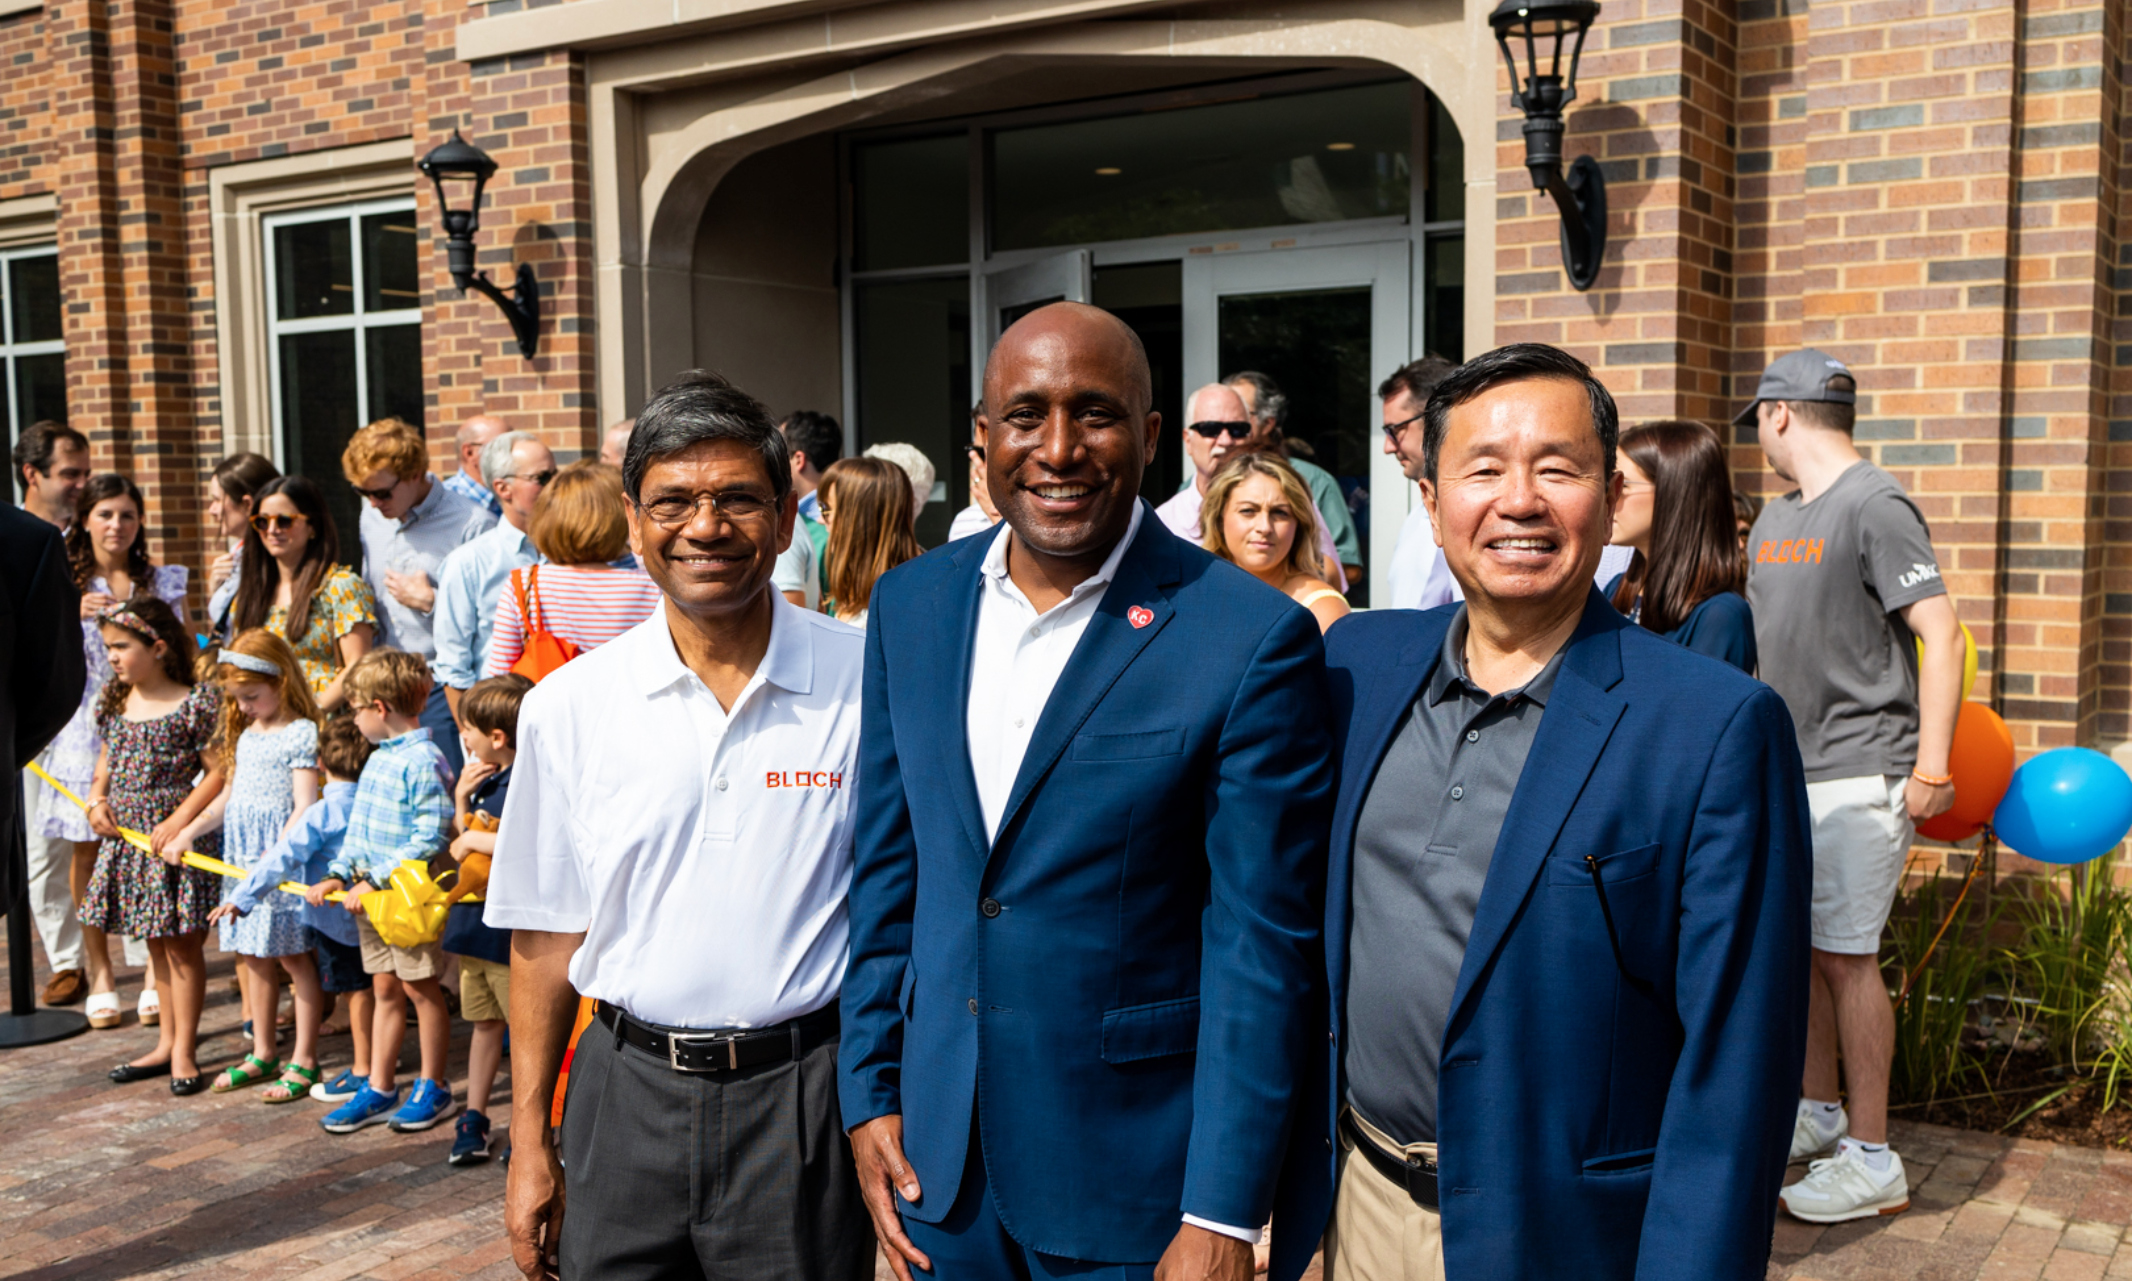 Chancellor Mauli Agrawal, Mayor Quinton Lucas and UM System President Mun Choi at the 100 years of Henry celebration